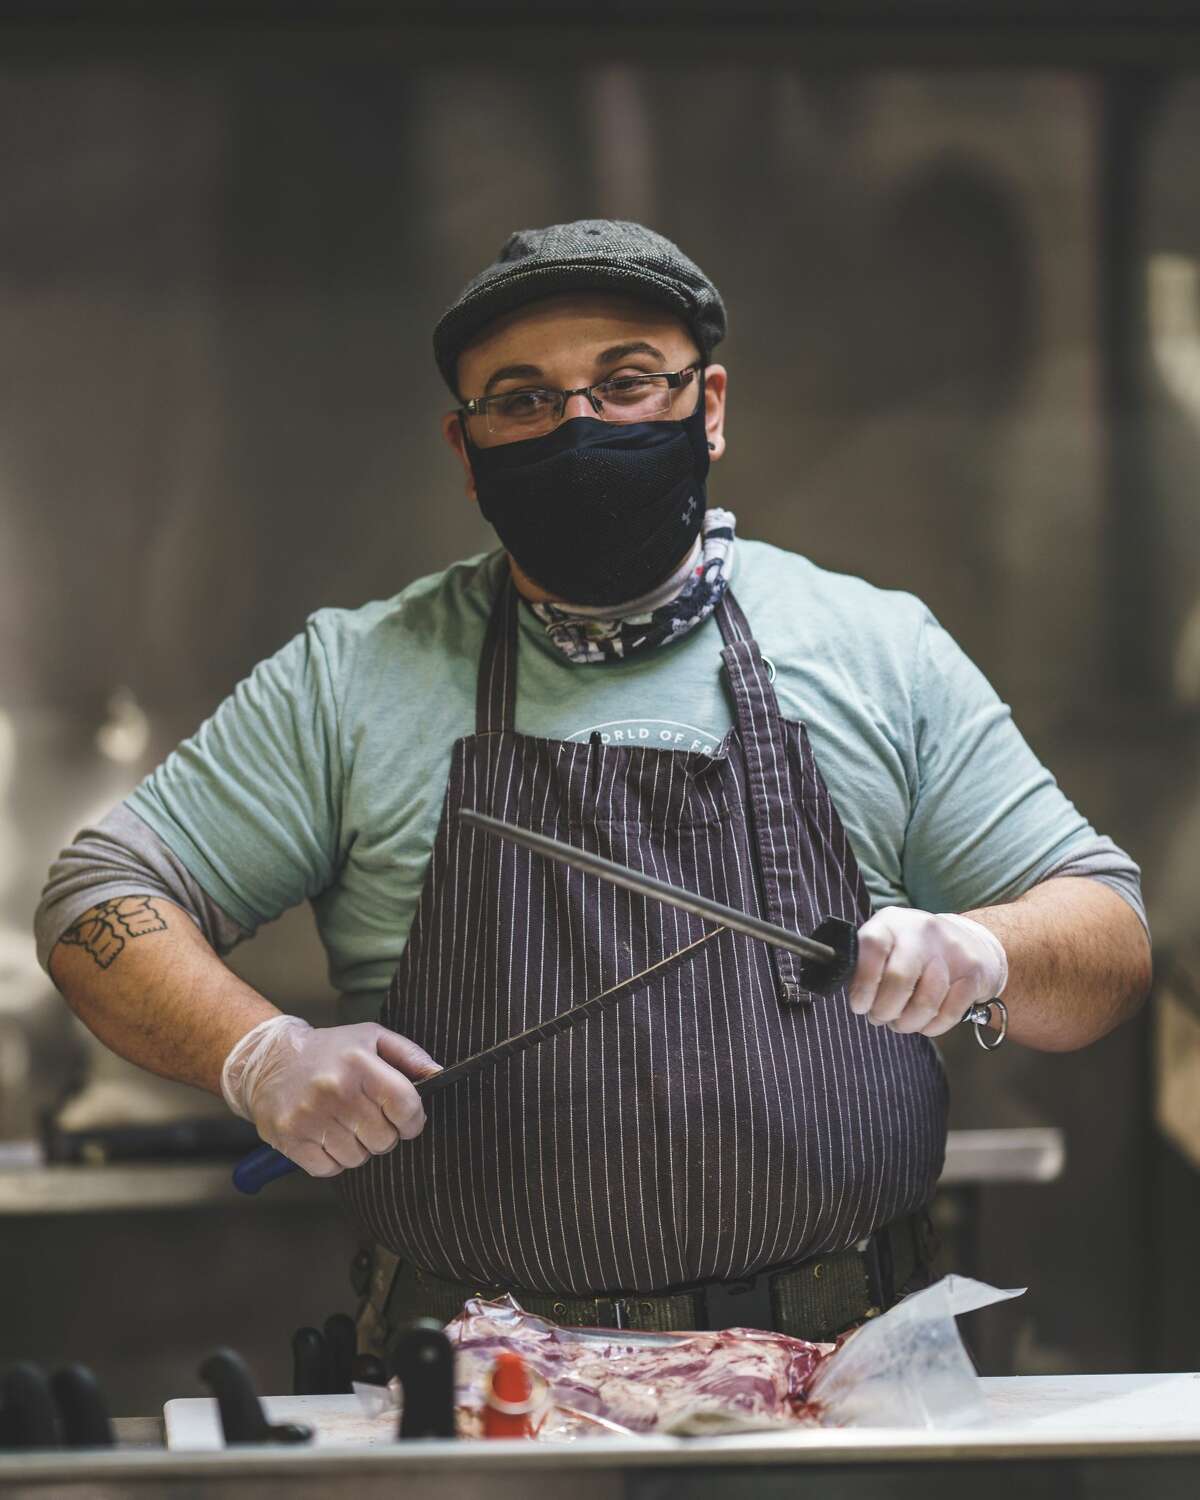 Meat Wagon owner Stefano Diaz learned to cook for himself at an early age, and discovered his love for butchery while working at the Biltmore in North Carolina. He served as head butcher at Fleisher’s Uptown Kingston location until it closed in 2017.